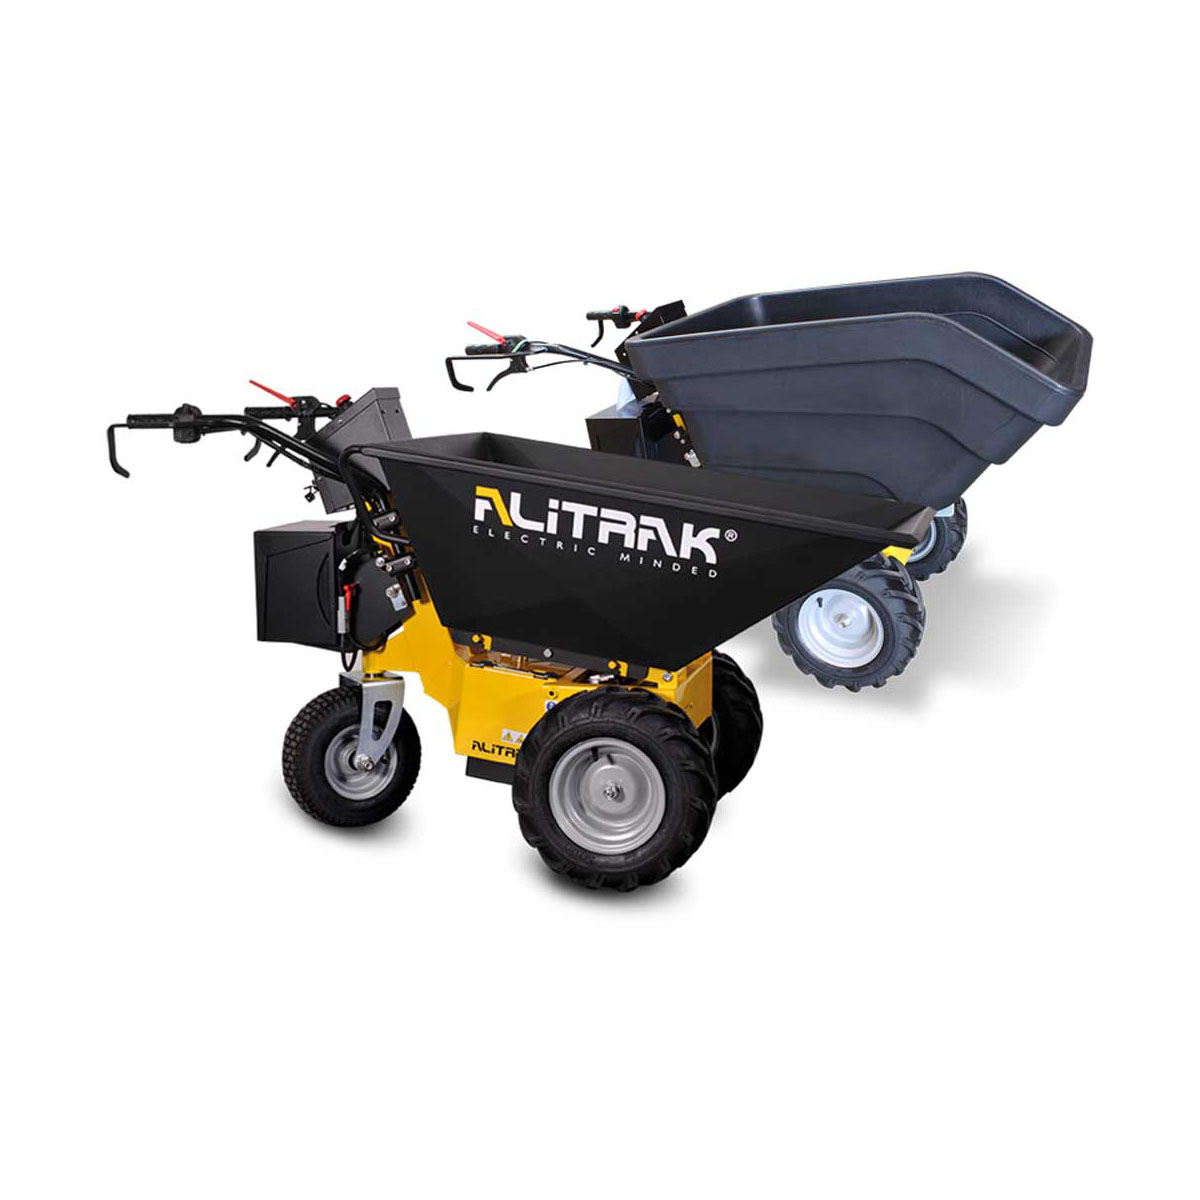 Buy Electric Dumper - Skip Mini in Electric Dumpers from Alitrak available at Astrolift NZ